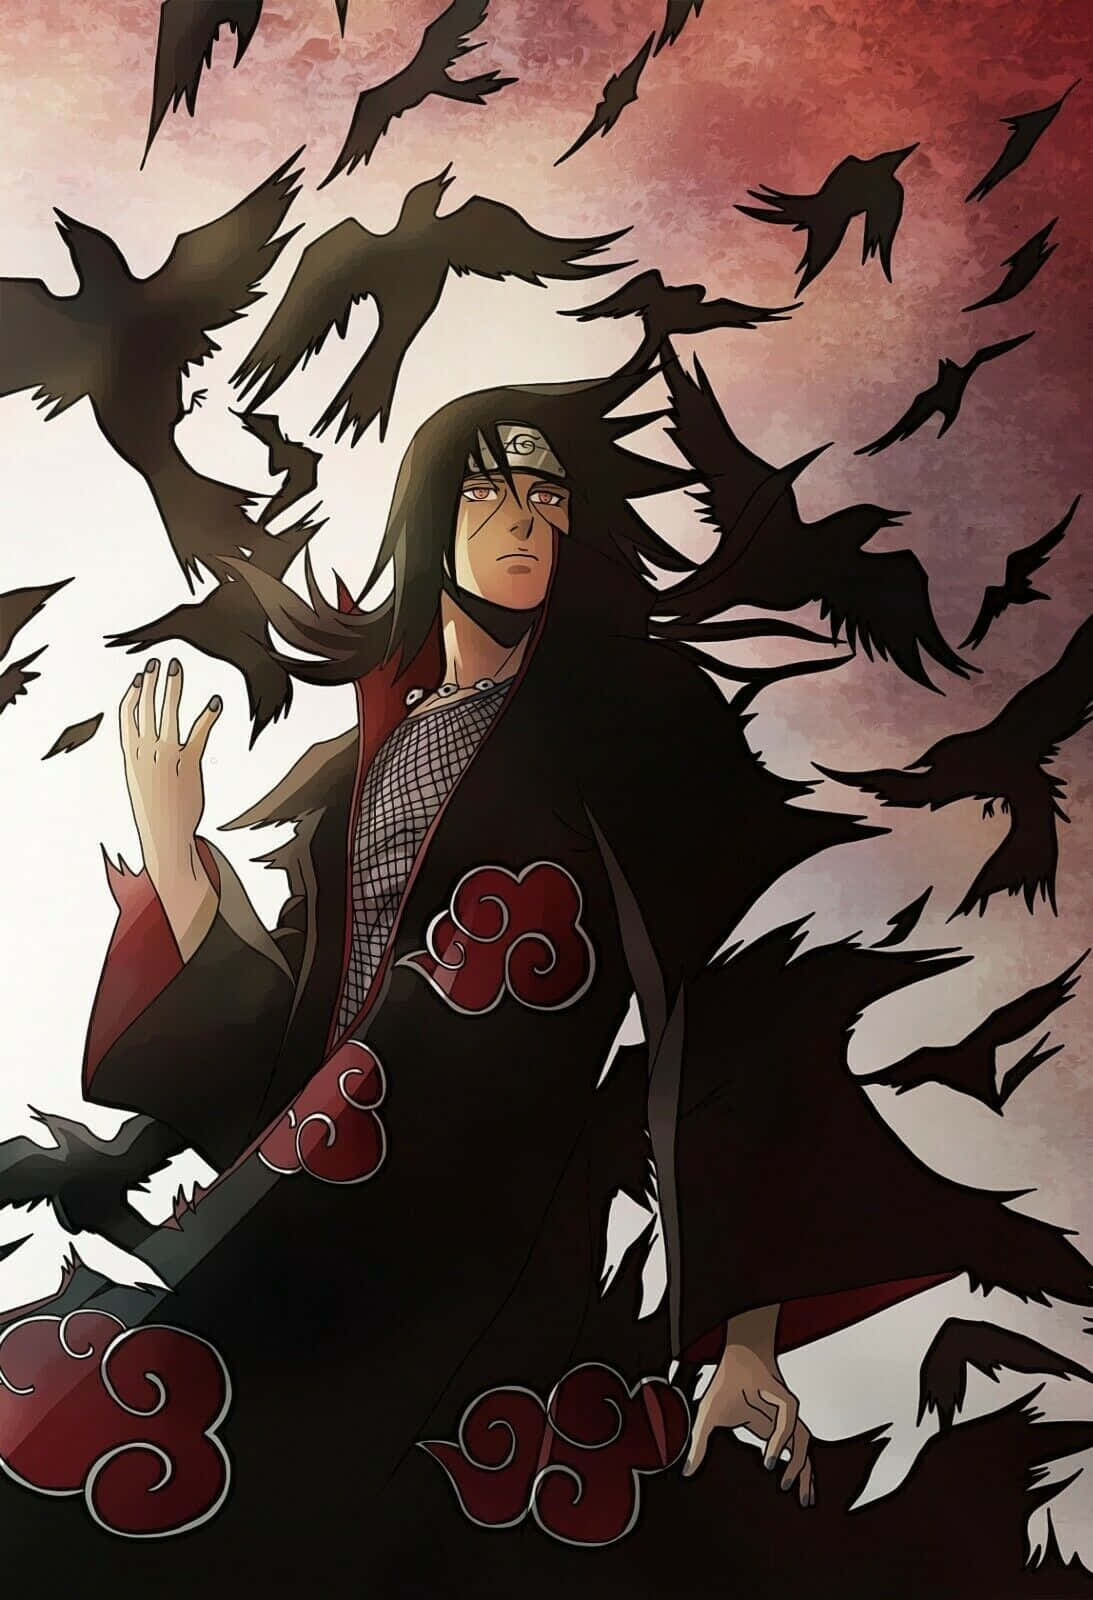 Itachi Uchiha, the mysterious ninja with unmatched power.